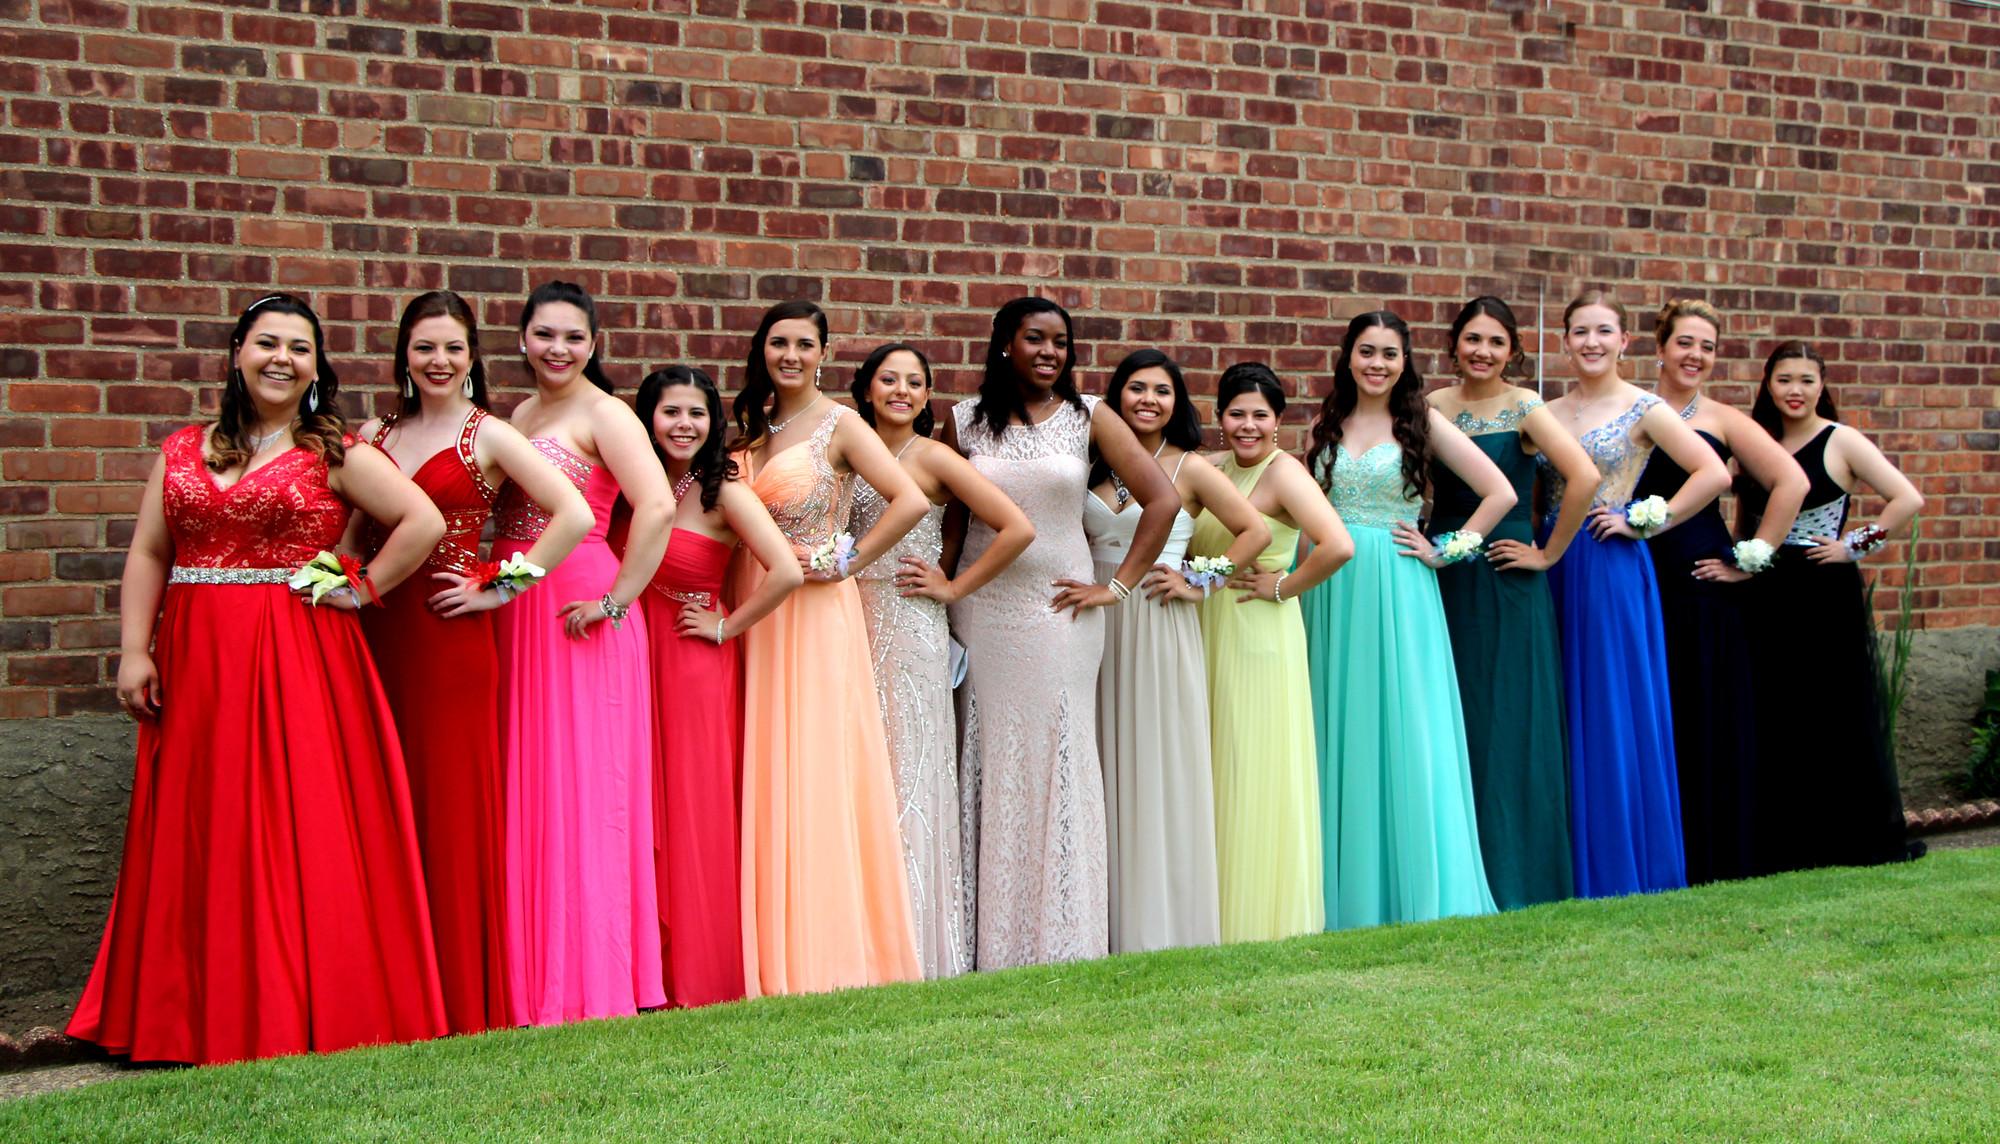 The girls showed off their colorful dresses before prom.